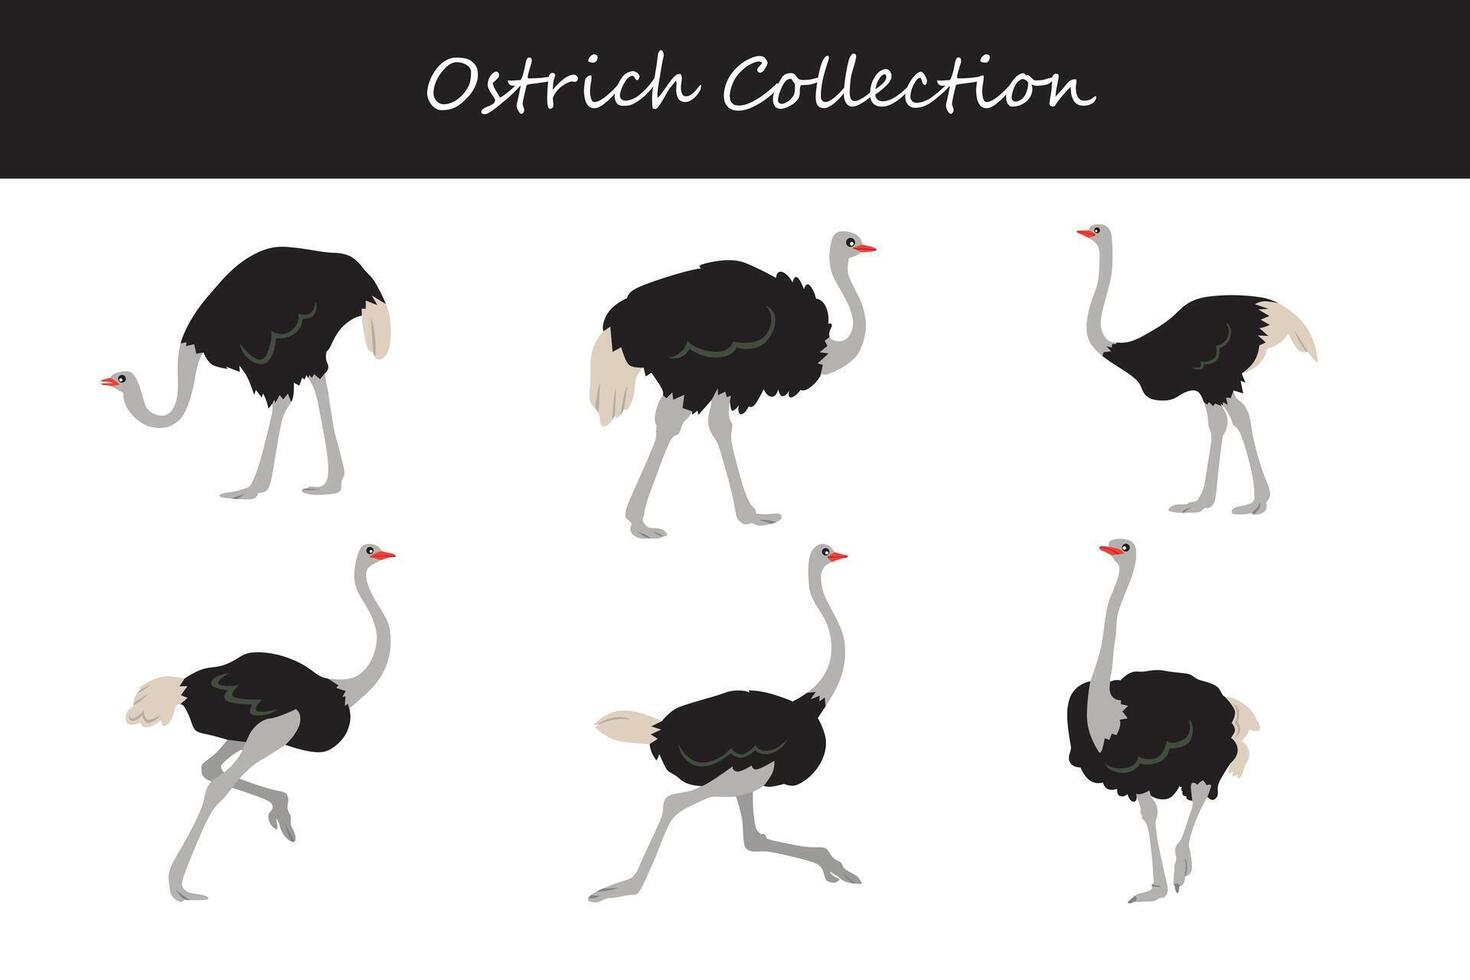 Ostrich collection. Vector illustration. Isolated on white background.